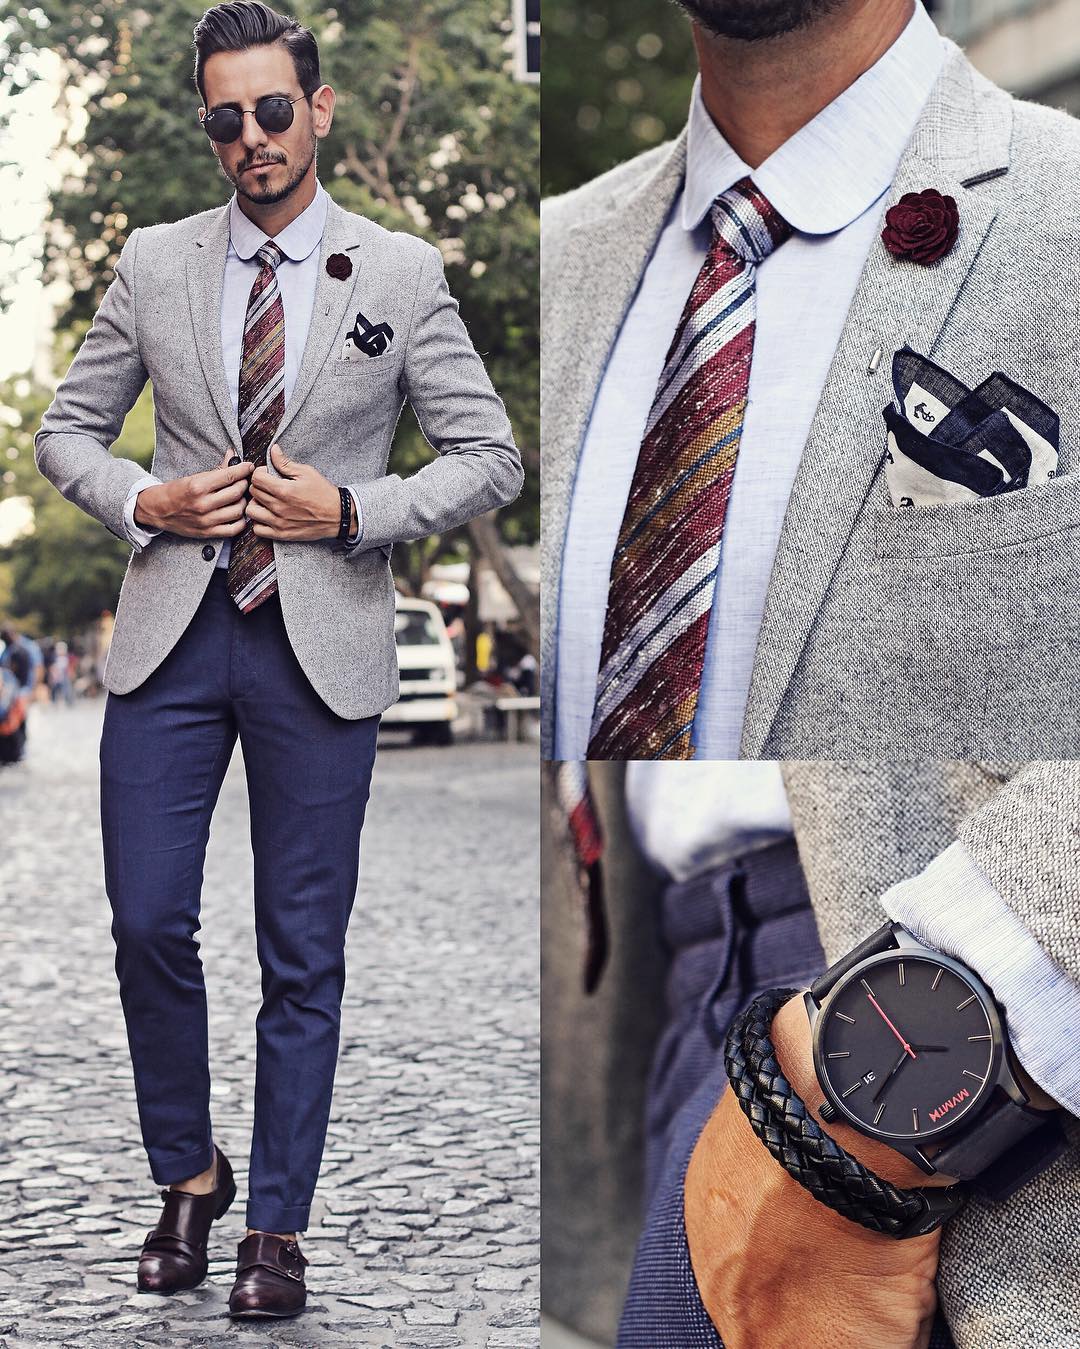 Suit Watch And Pocket Square Combinations For Men